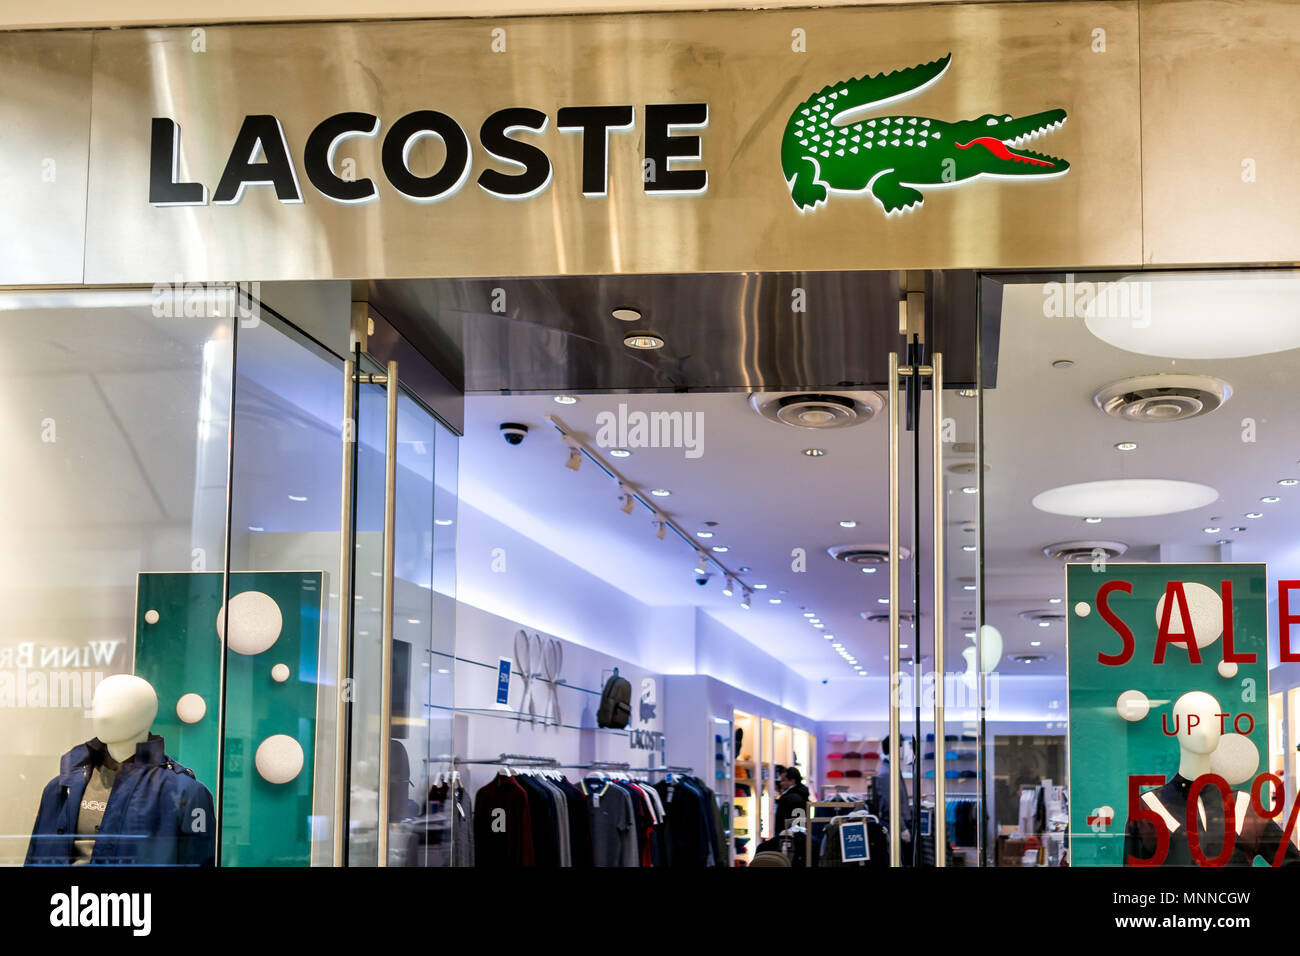 Tysons, USA - January 26, 2018: Lacoste store sign entrance shop alligator  logo in Tyson's Corner Mall in Fairfax, Virginia by Mclean Stock Photo -  Alamy